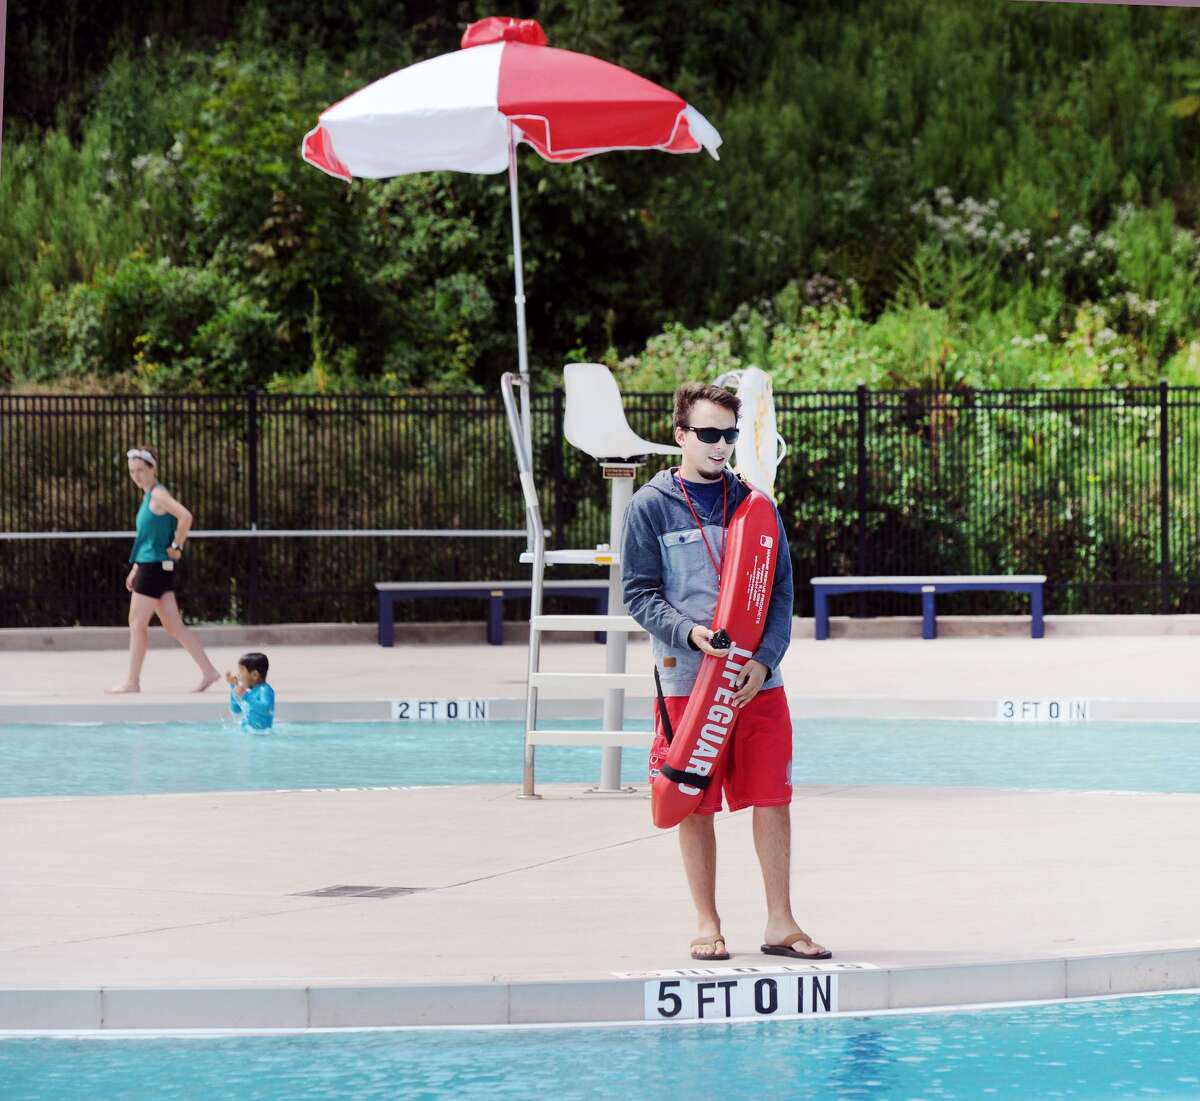 A lifeguard on duty at the Byram Park Pool in Greenwich, Conn., Friday, Aug. 31, 2018. Lifeguards are exempt from a town ban on flip-flops for employees.